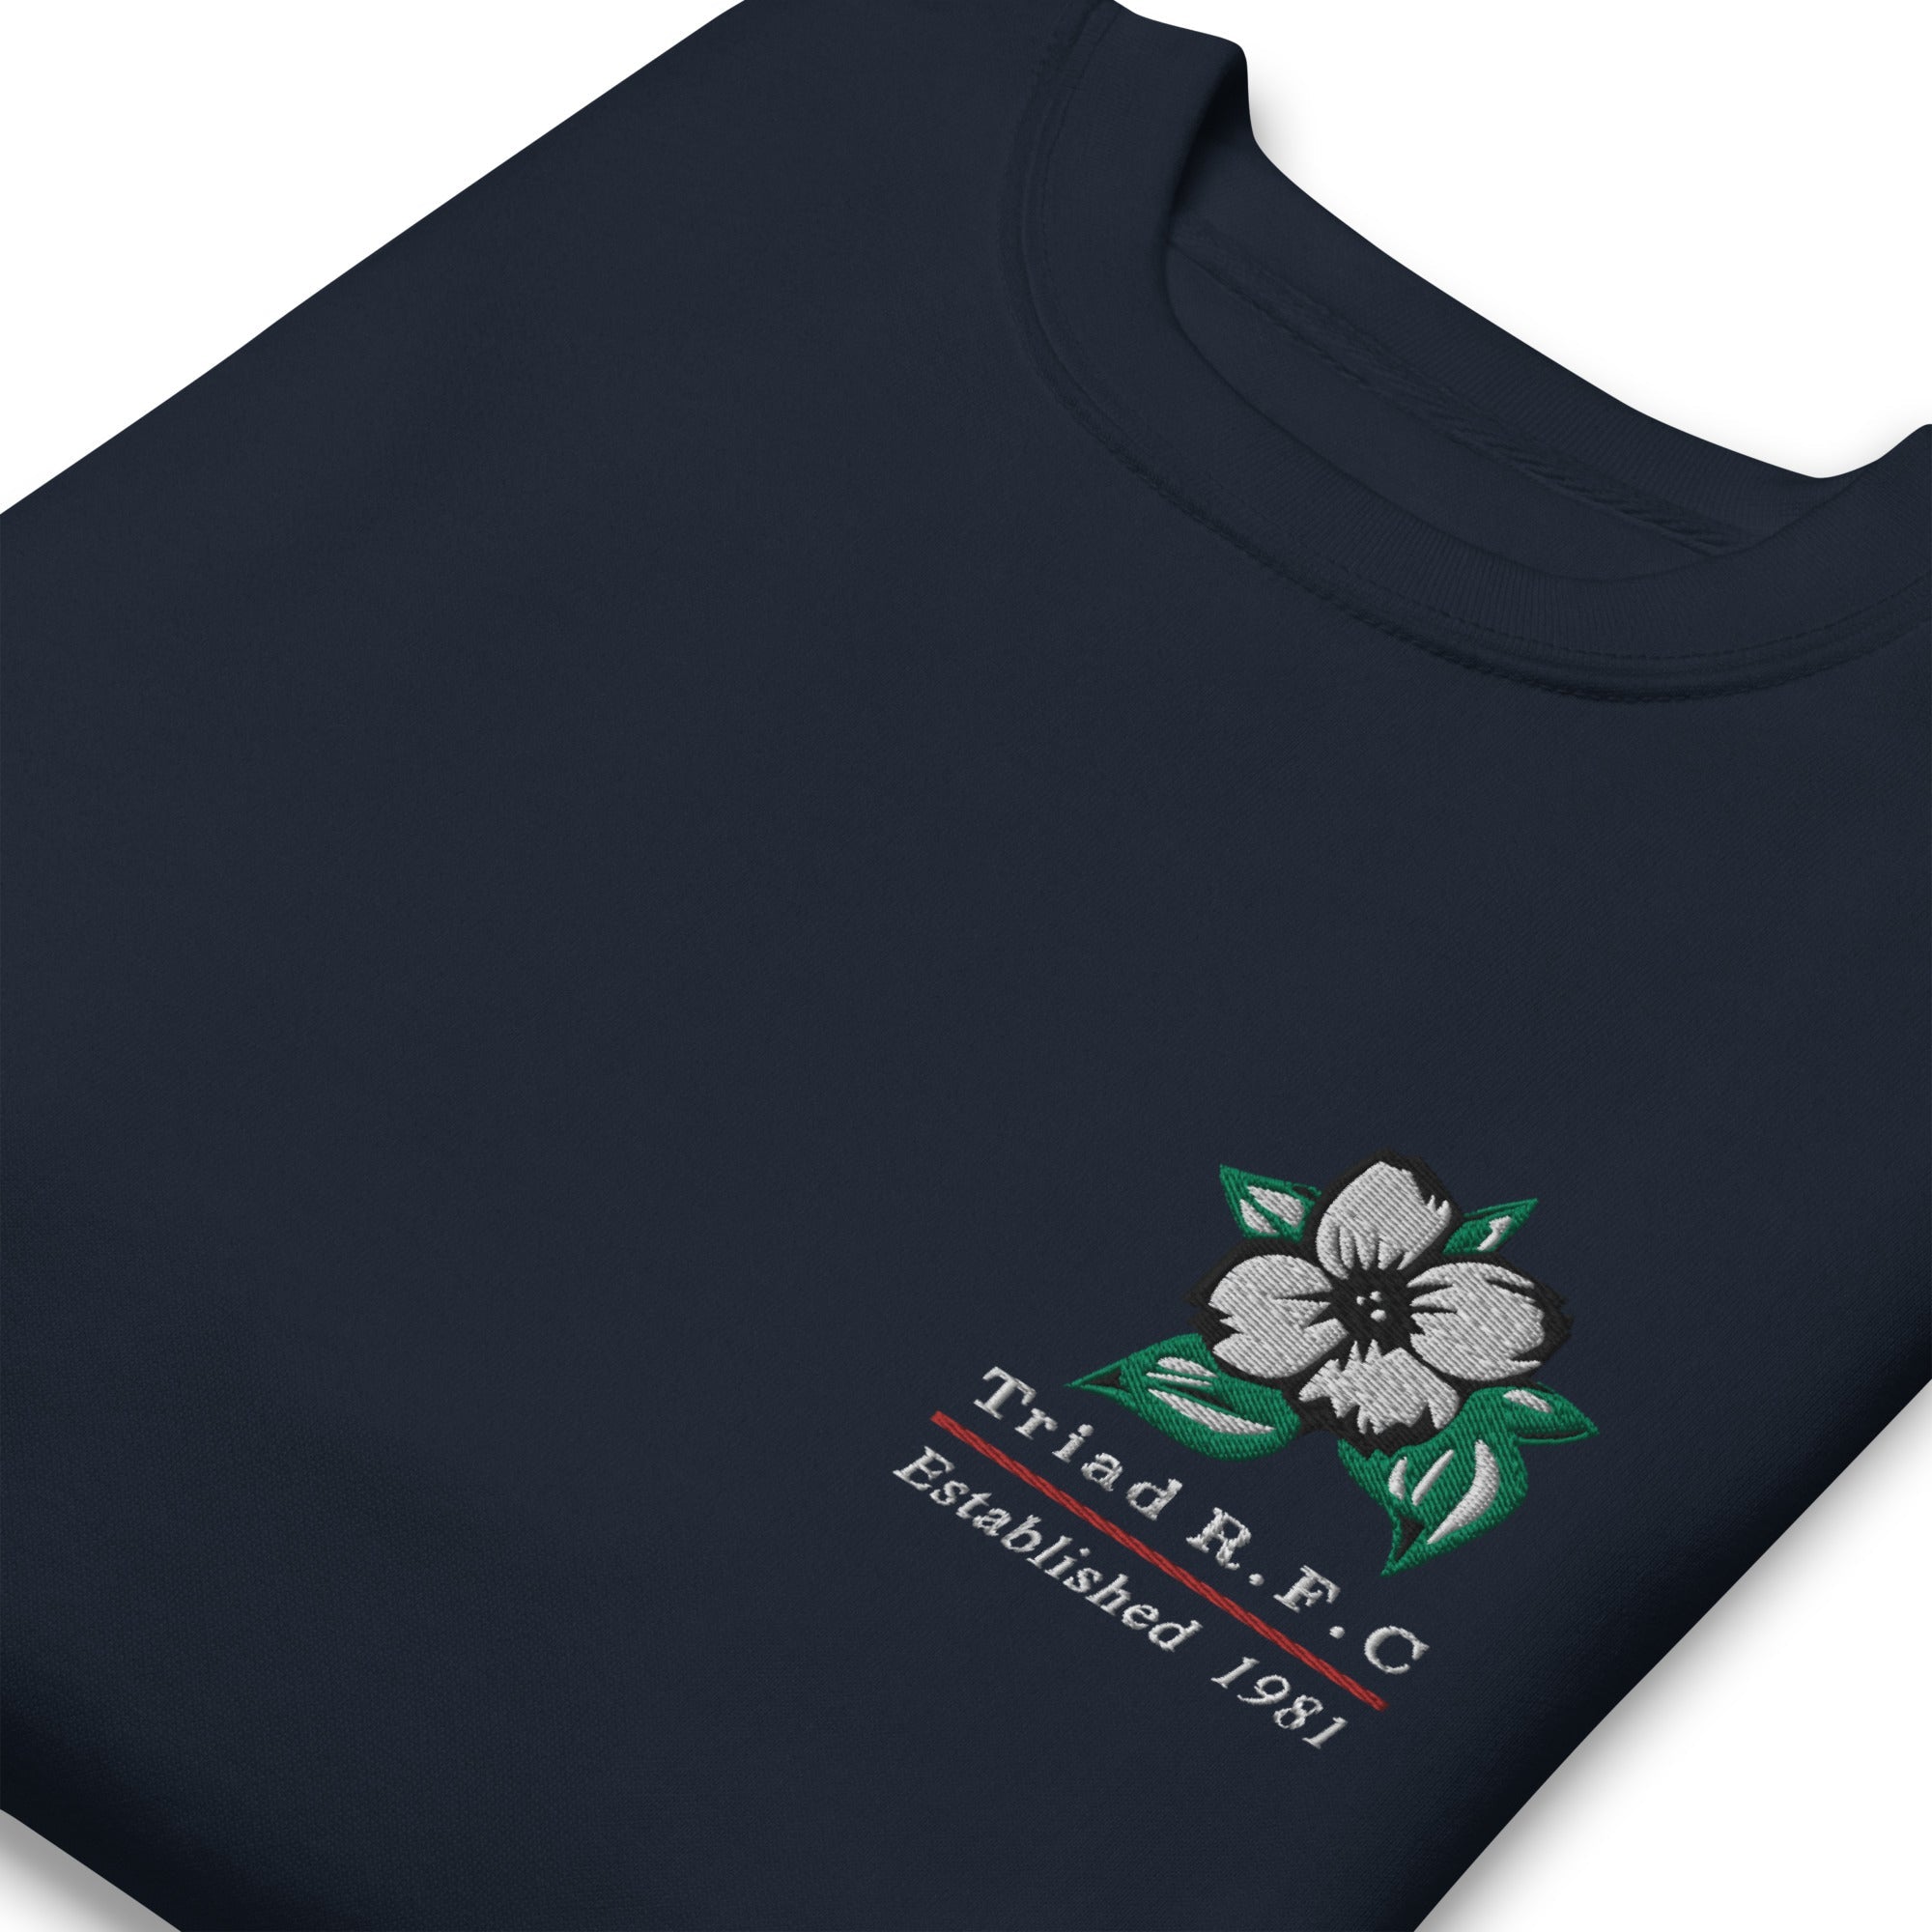 Rugby Imports Triad RFC Embroidered Crewneck